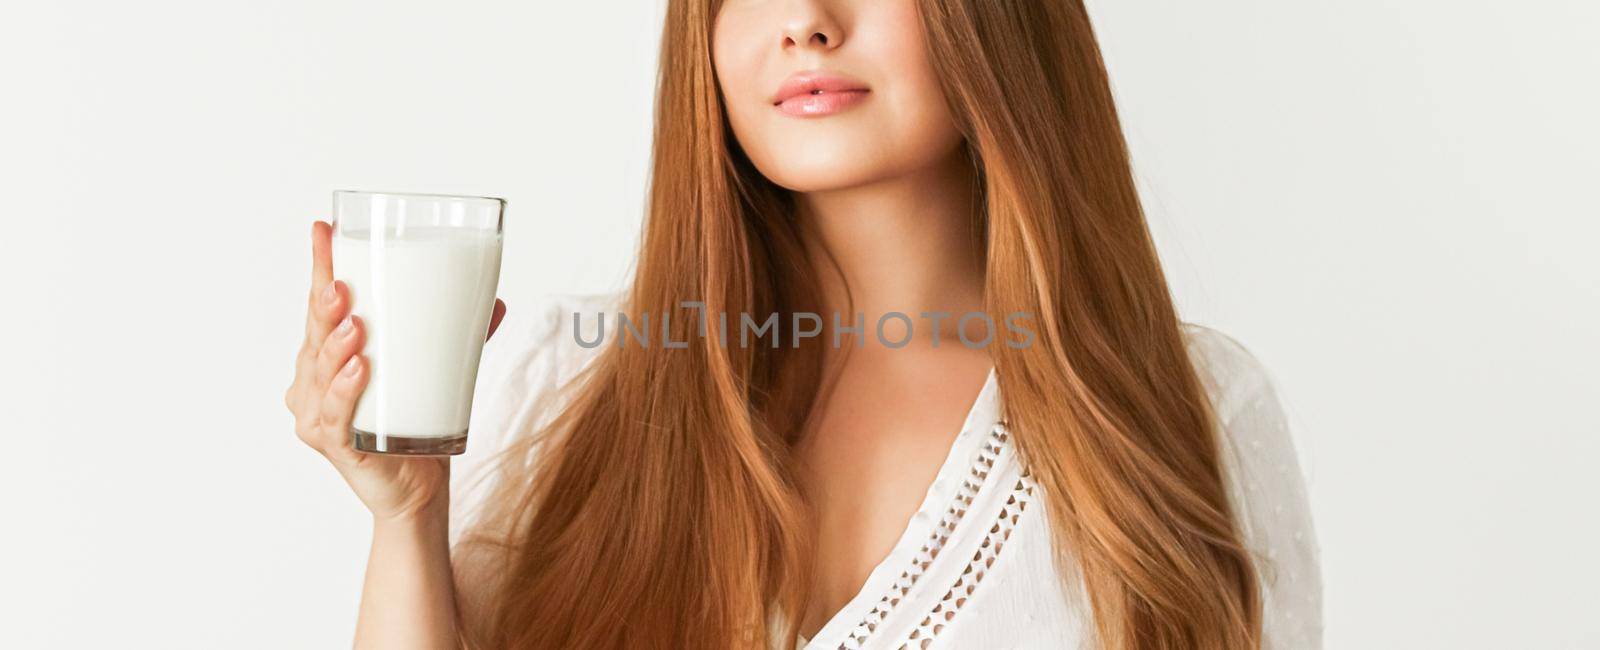 Diet, health and wellness, woman holding glass of milk or protein shake cocktail by Anneleven